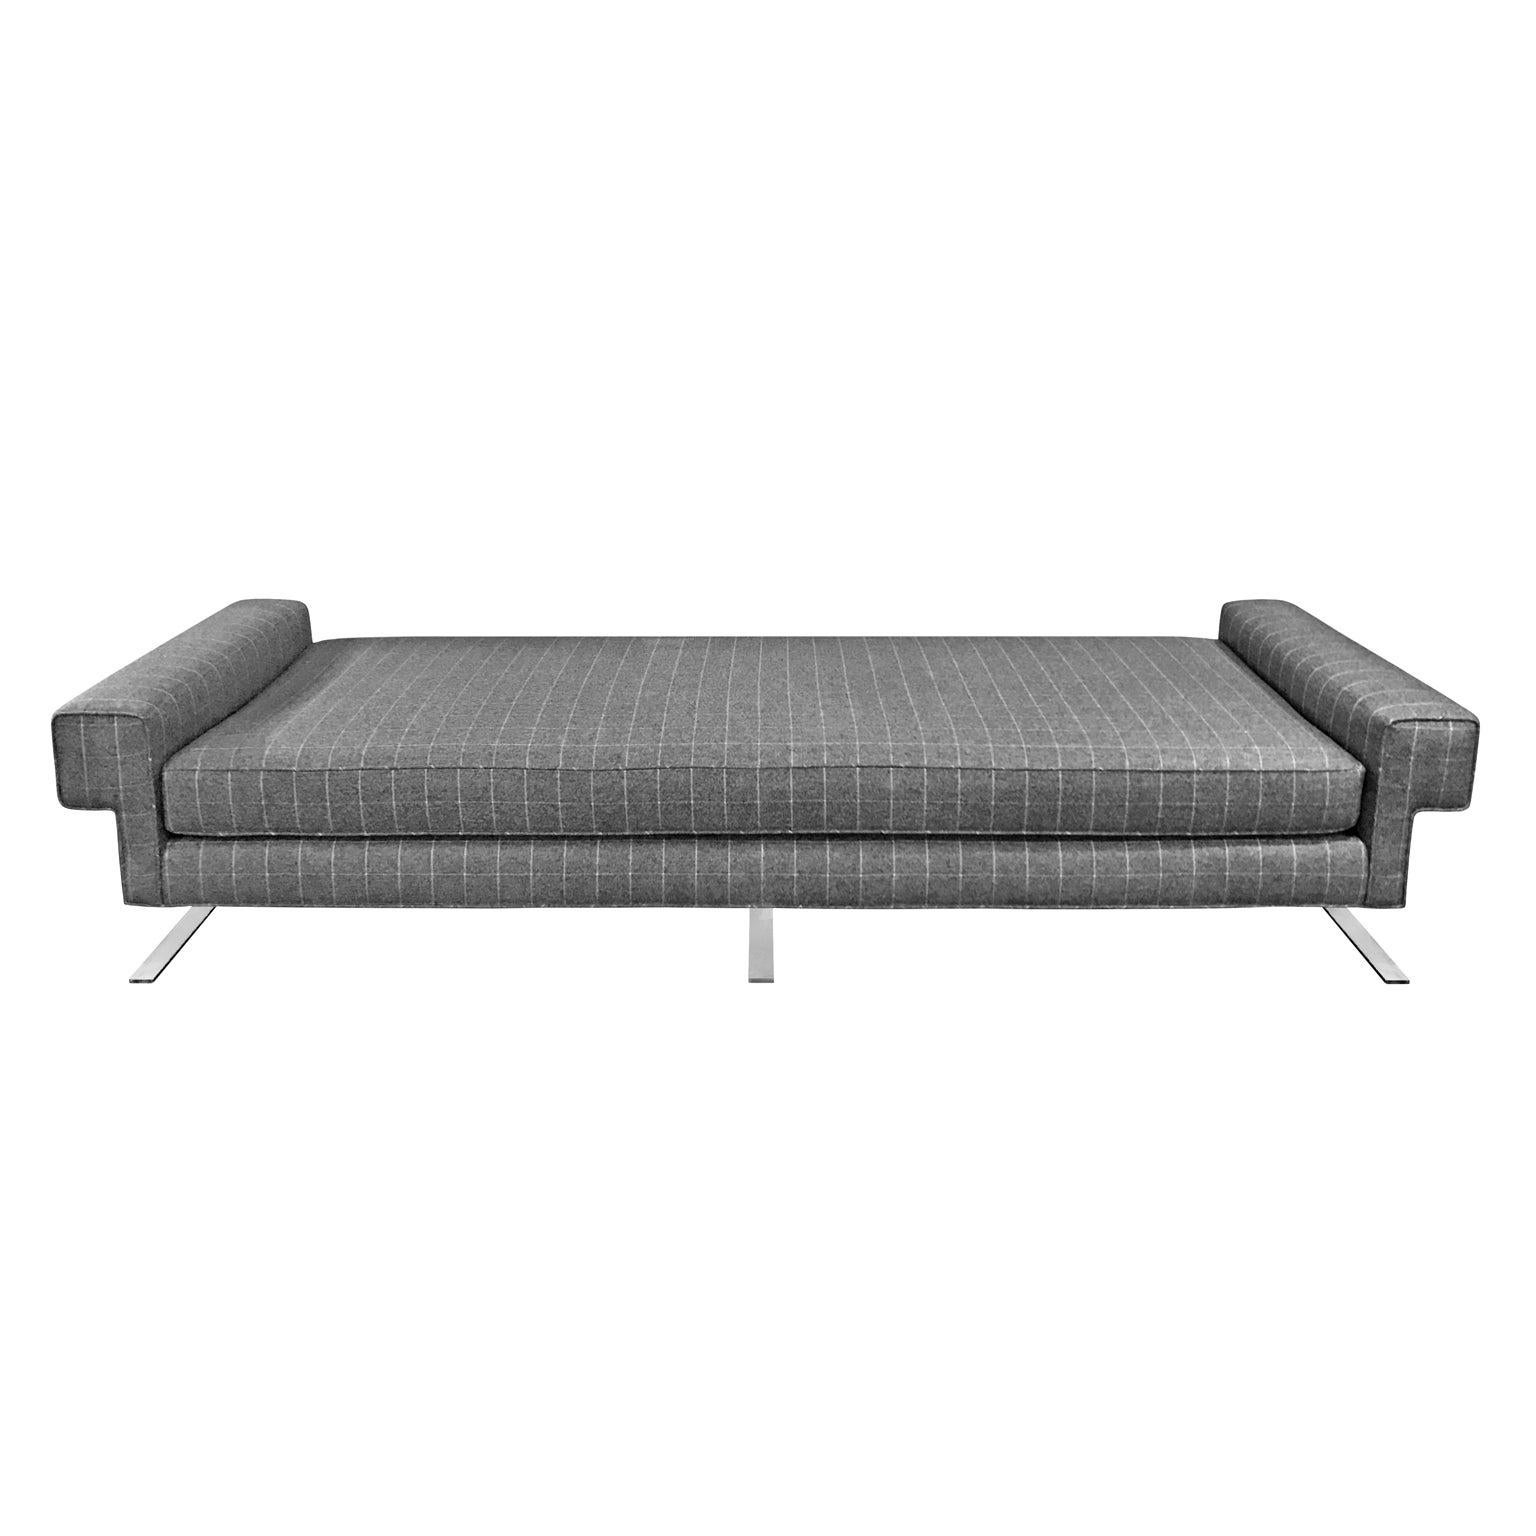 Vintage daybed newly upholstered in grey windowpane flannel on chromed iron base, USA, 1965.
  